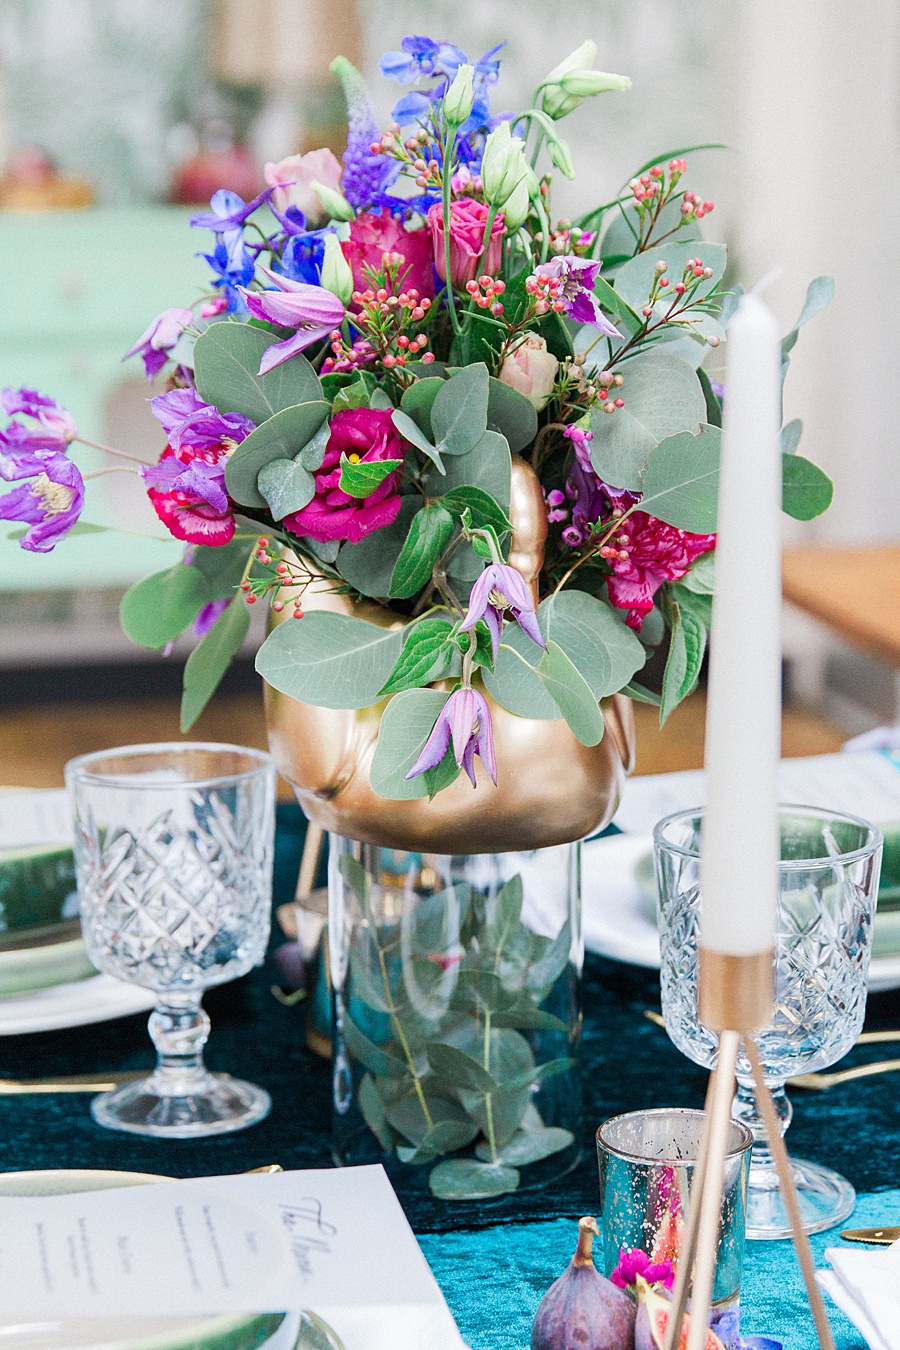 inspiration for a Greek wedding, photo credit Maxeen Kim Photography (29)